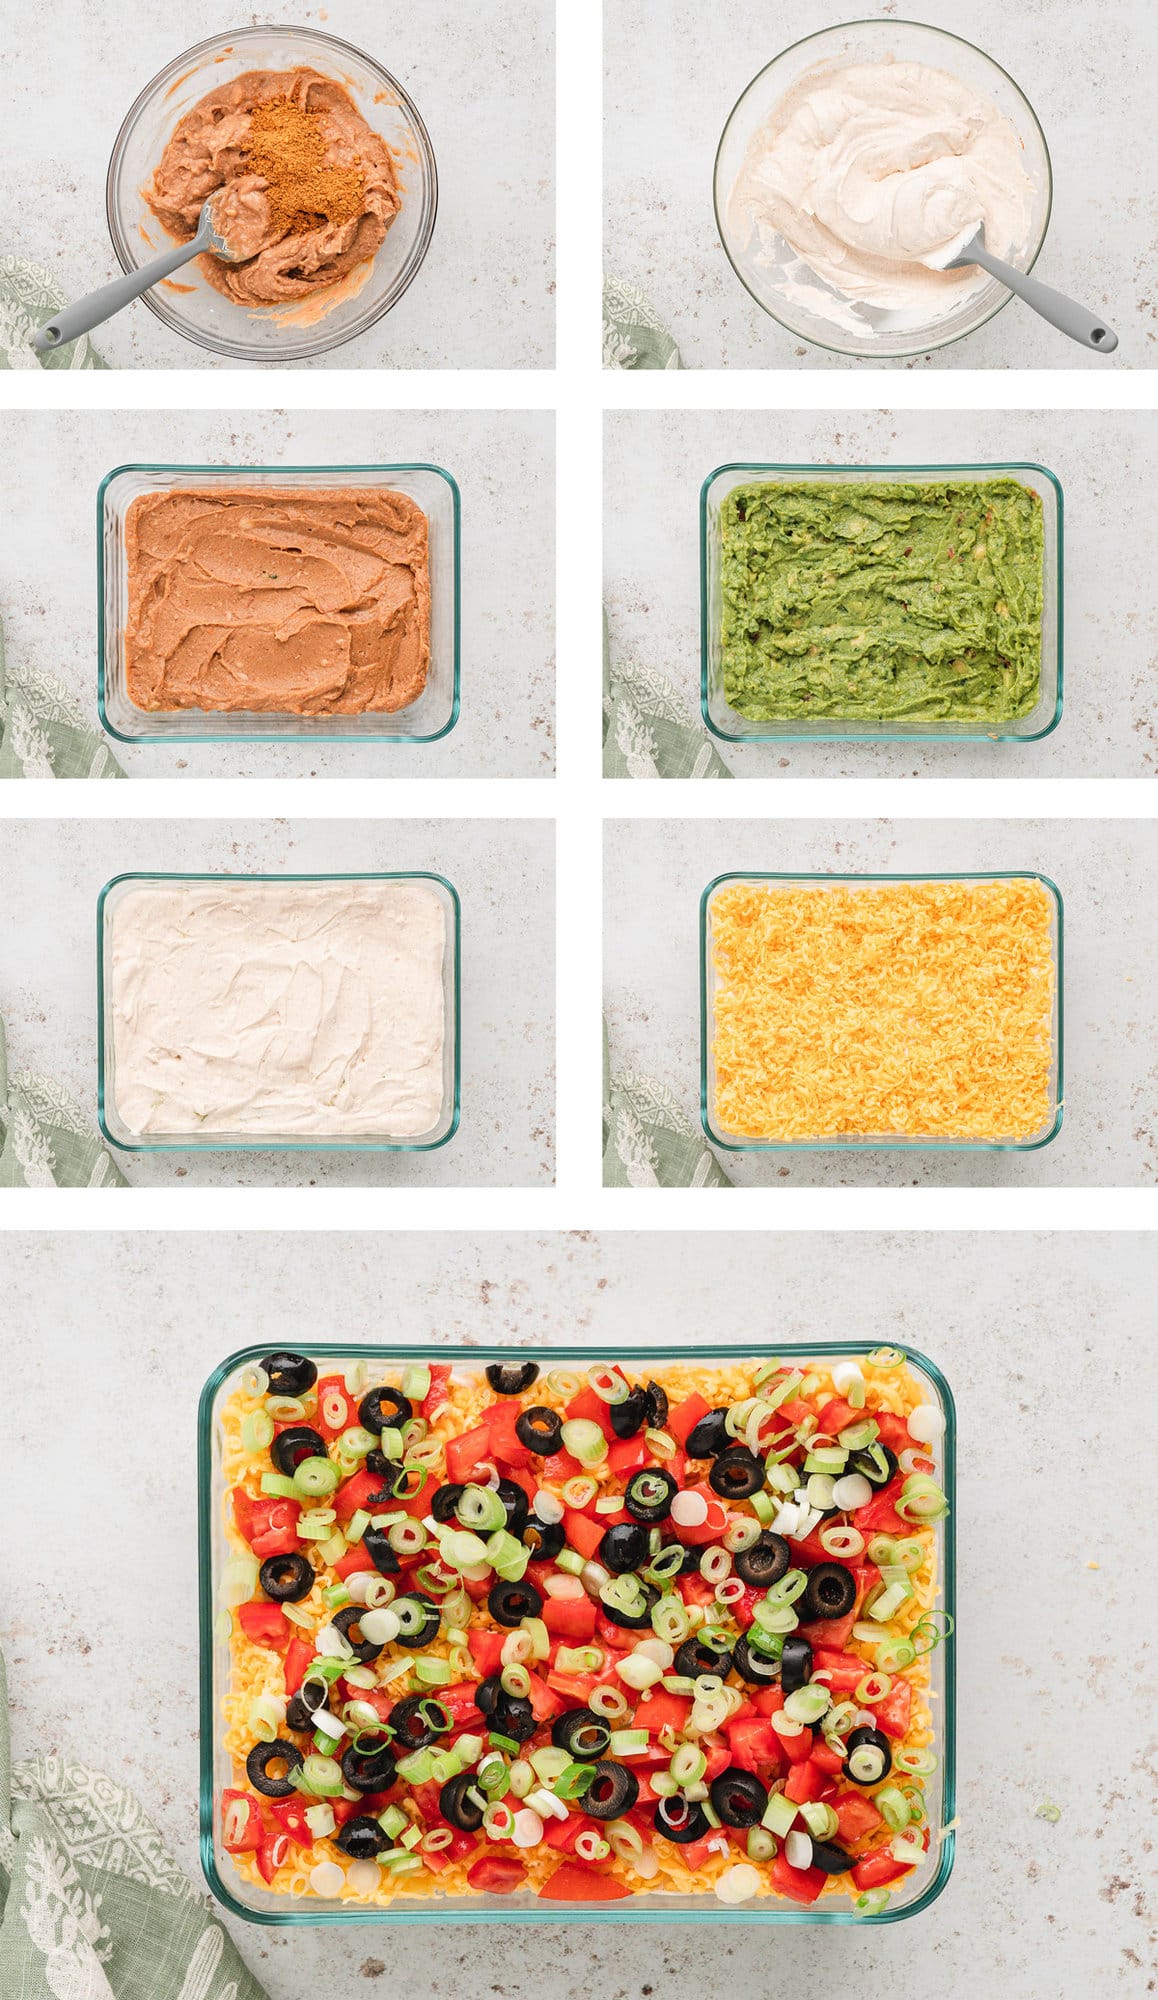 Collage of images showing the layers being added in a 7 layer dip.